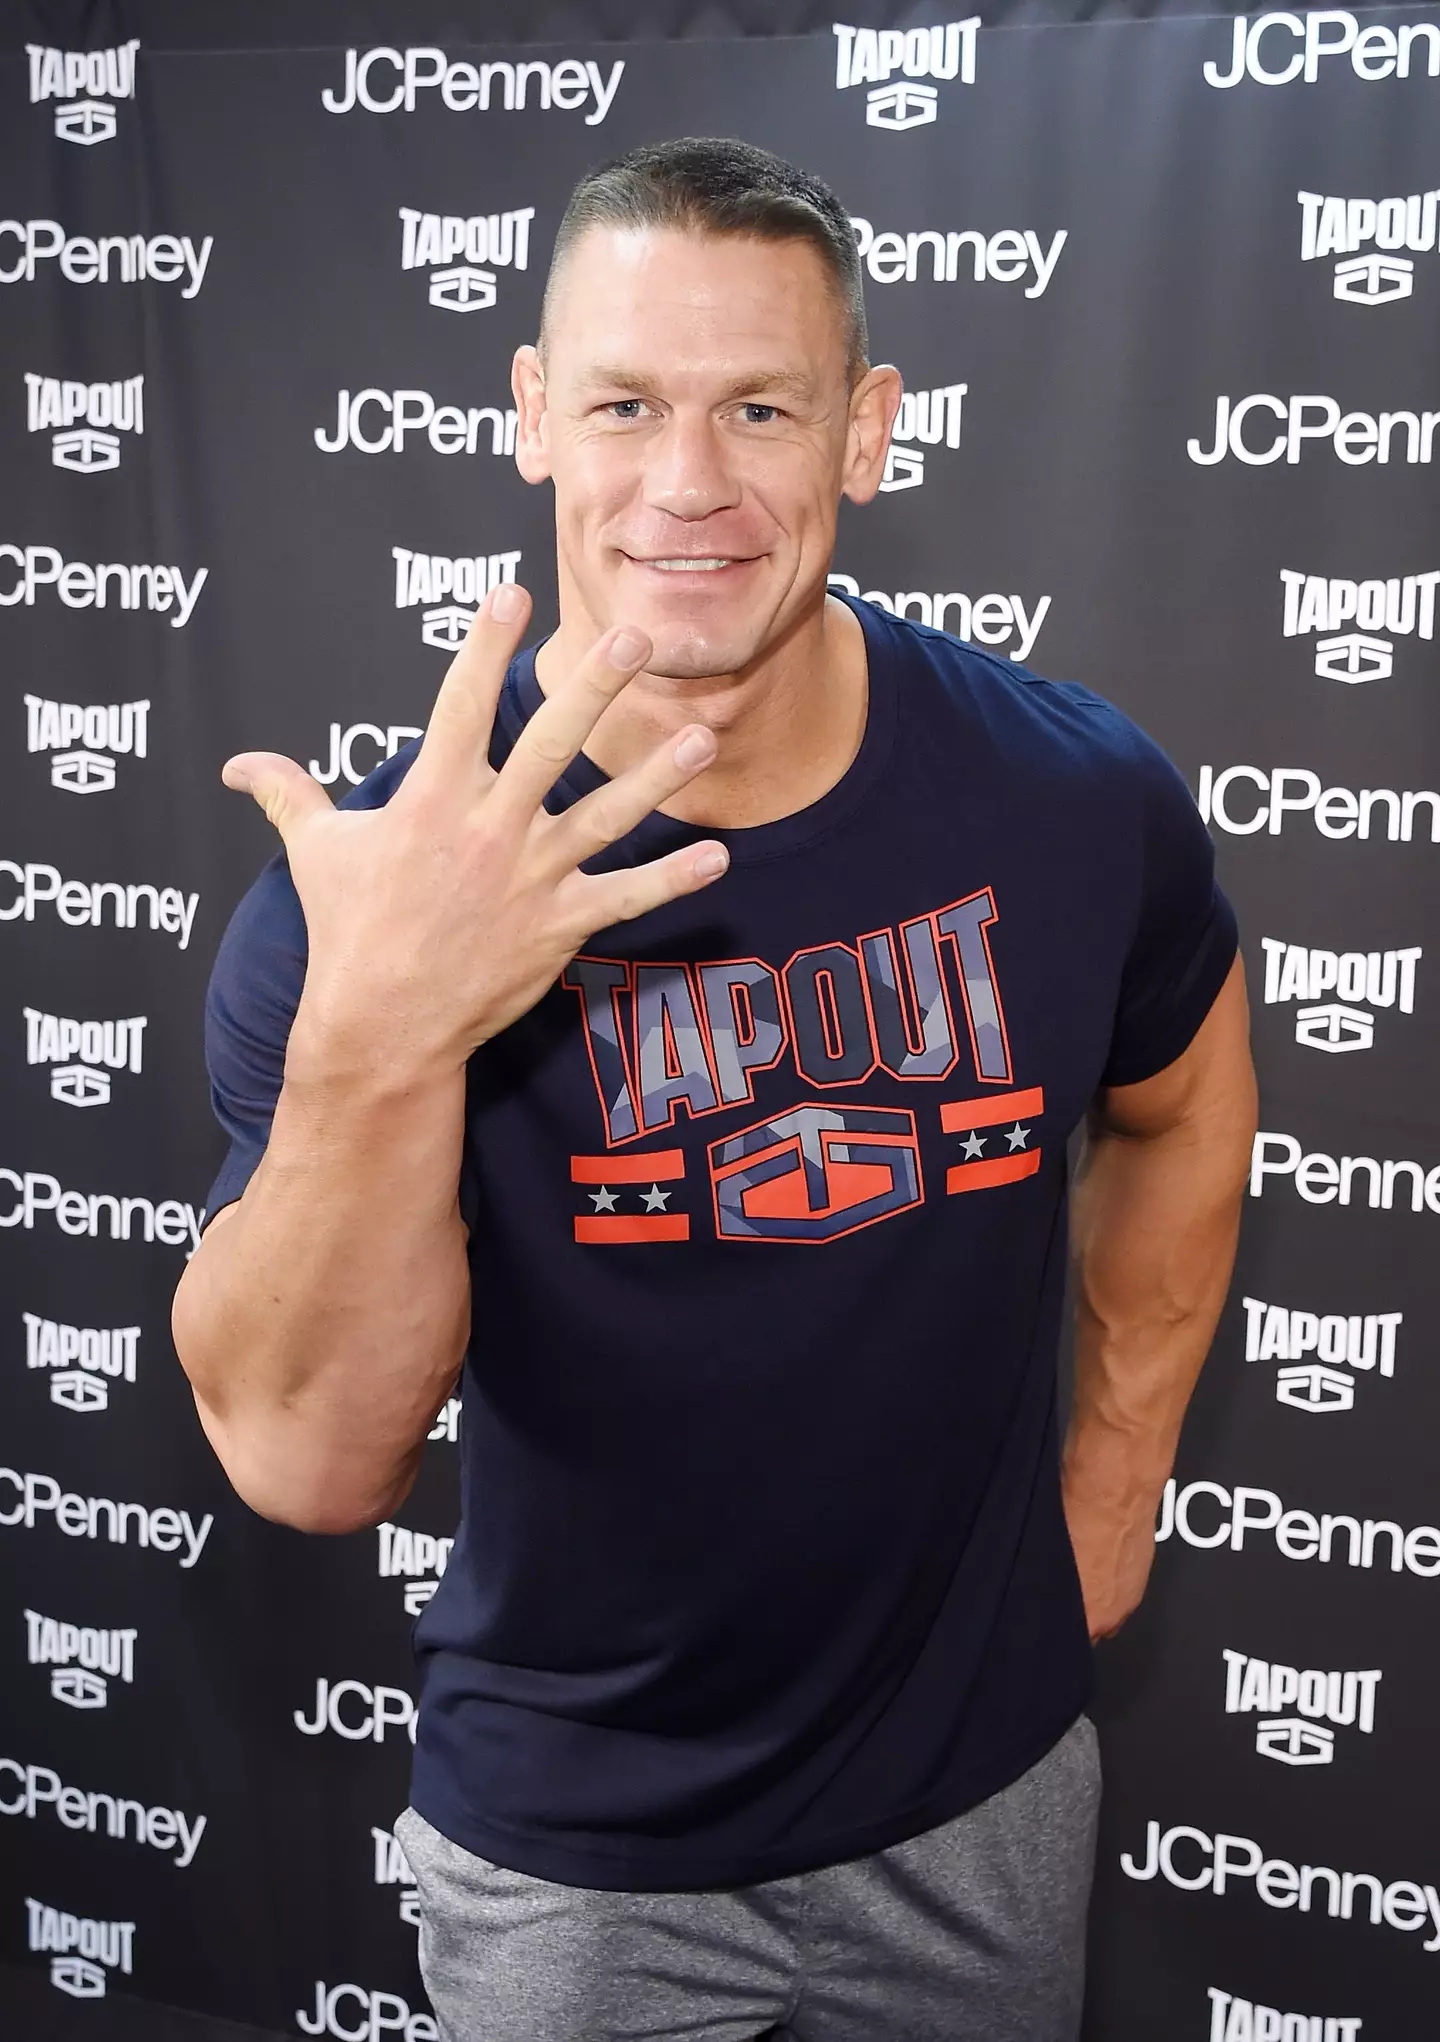 'You can't see me' is John Cena's signature move.